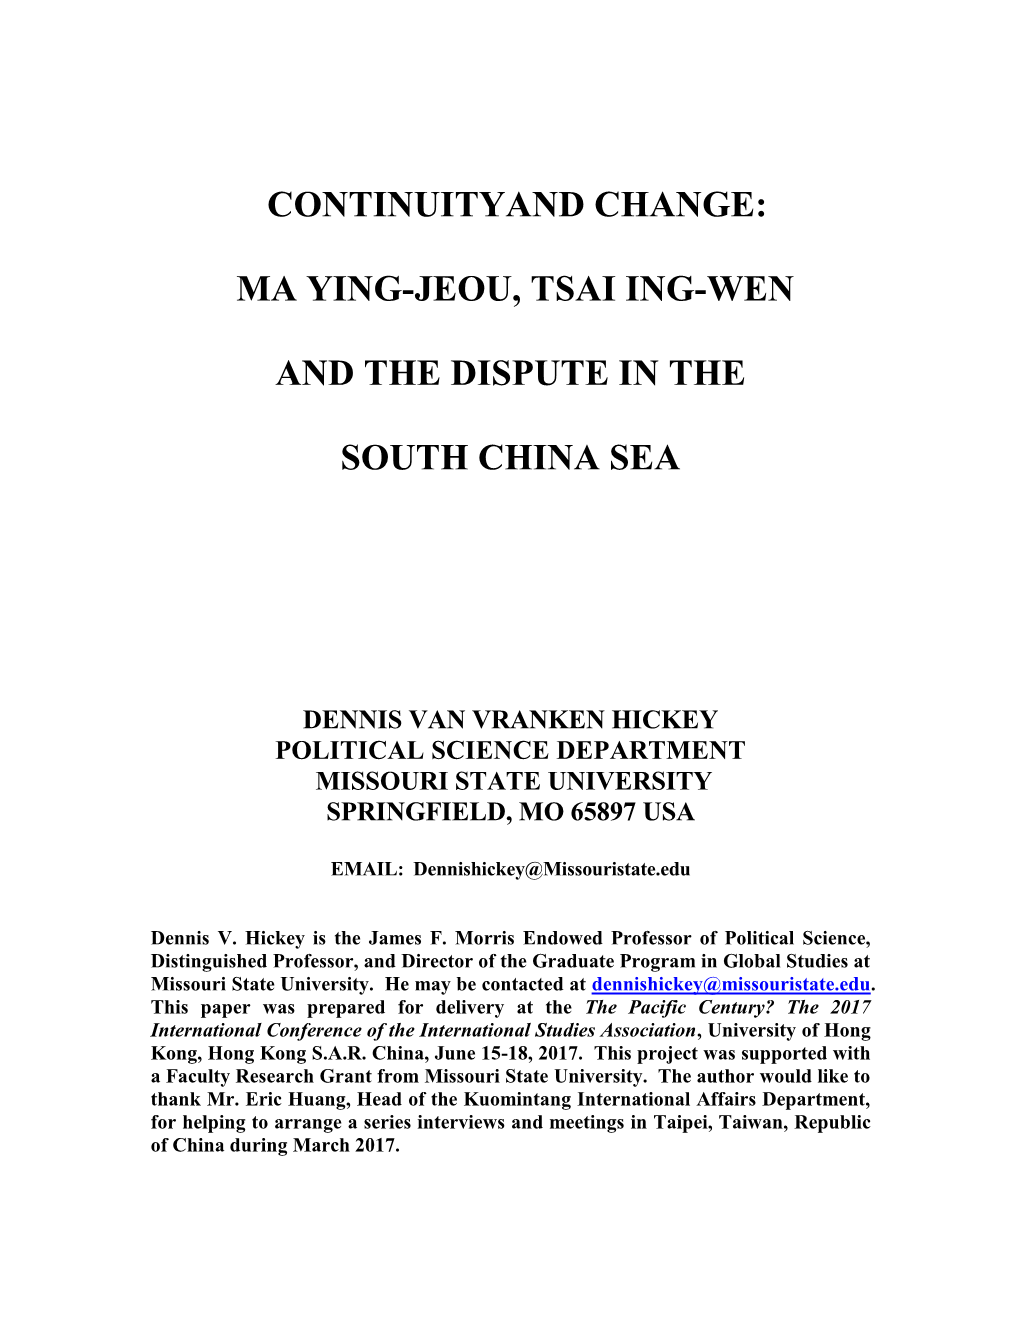 Since 2010, a Series of Quarrels and Incidents in the South China Sea